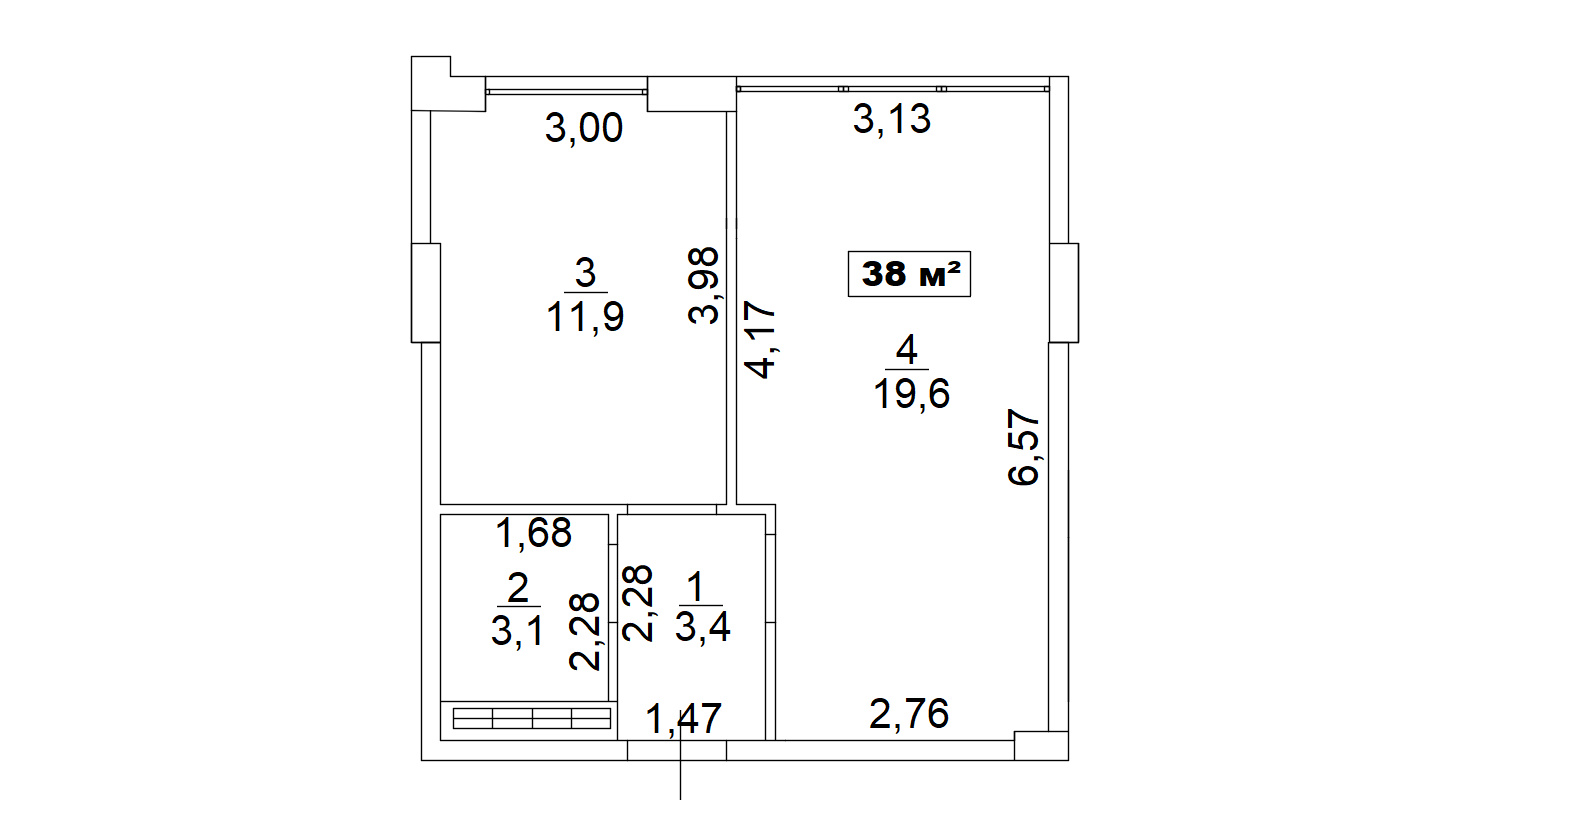 Planning 1-rm flats area 38m2, AB-13-07/00057.